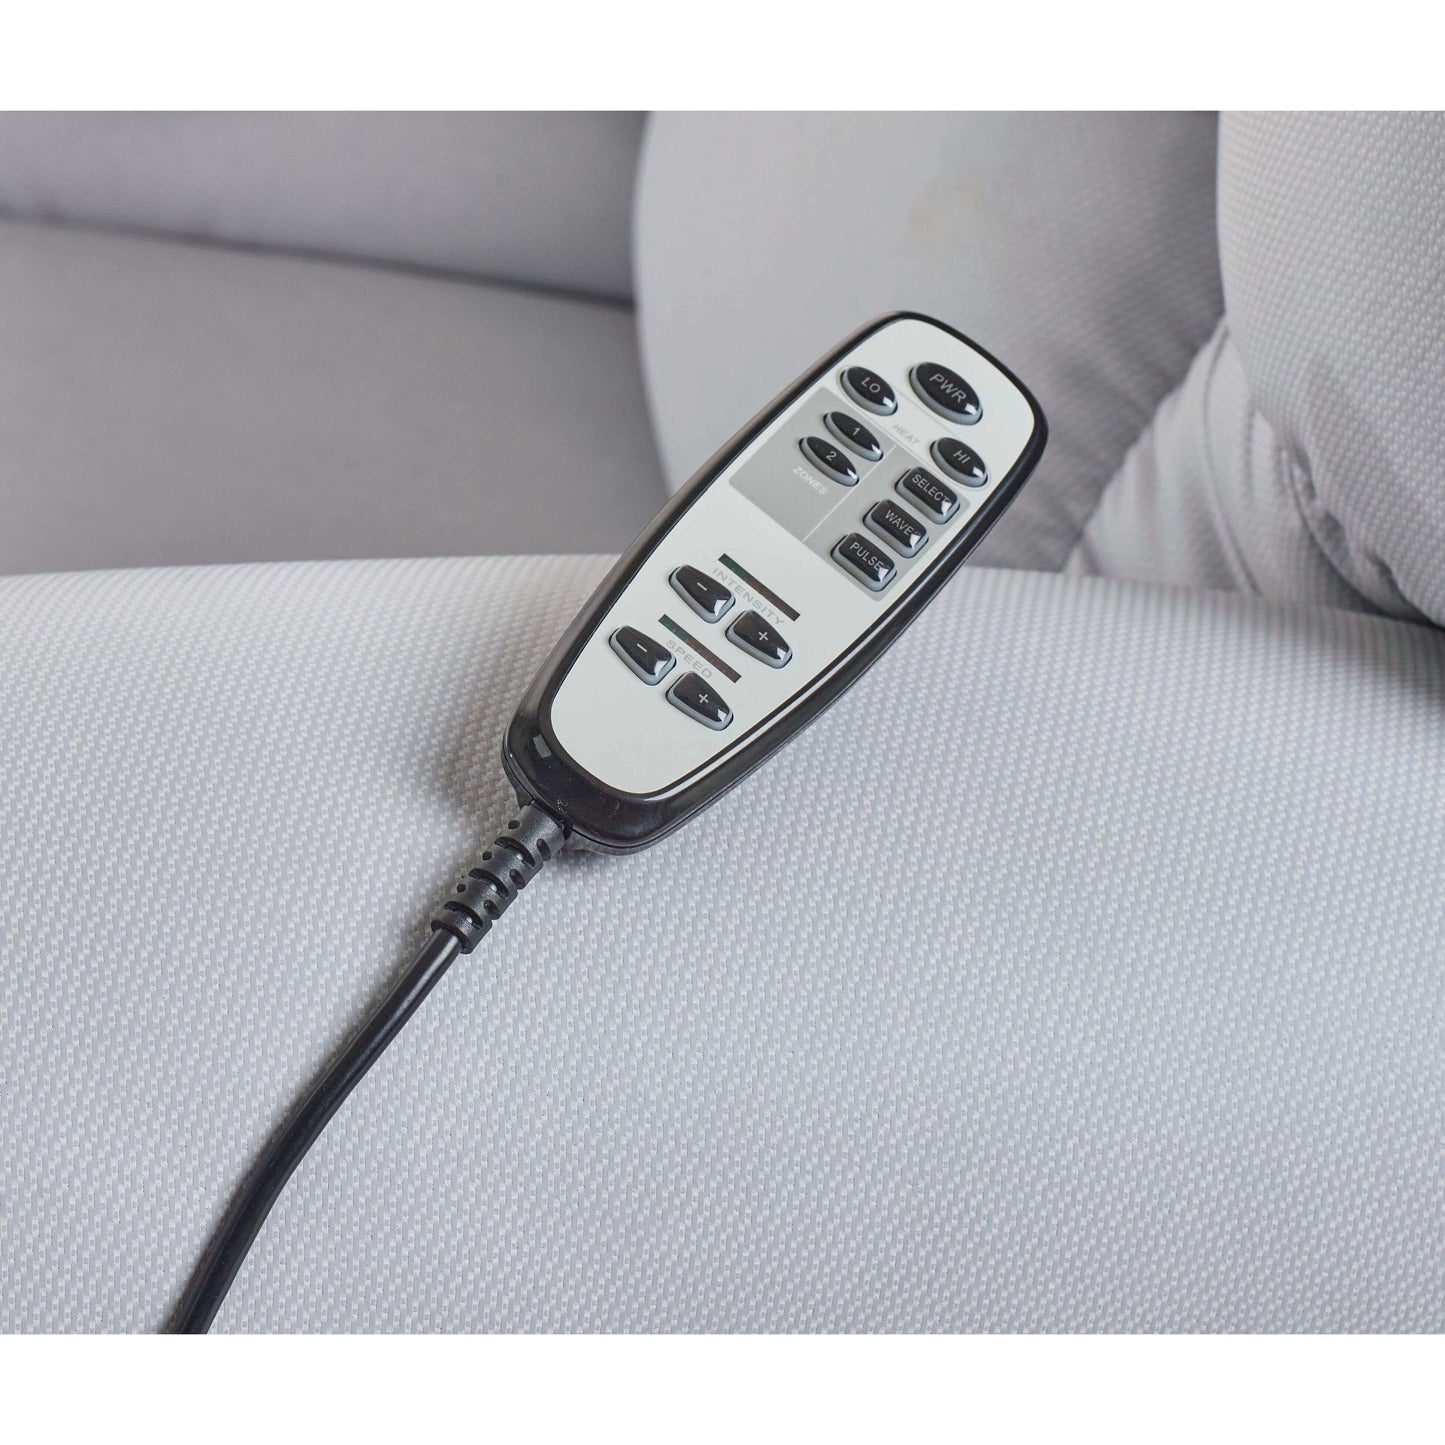 Sleep Chair remote controlling the upper and lower body. Remote features heat and massage controls